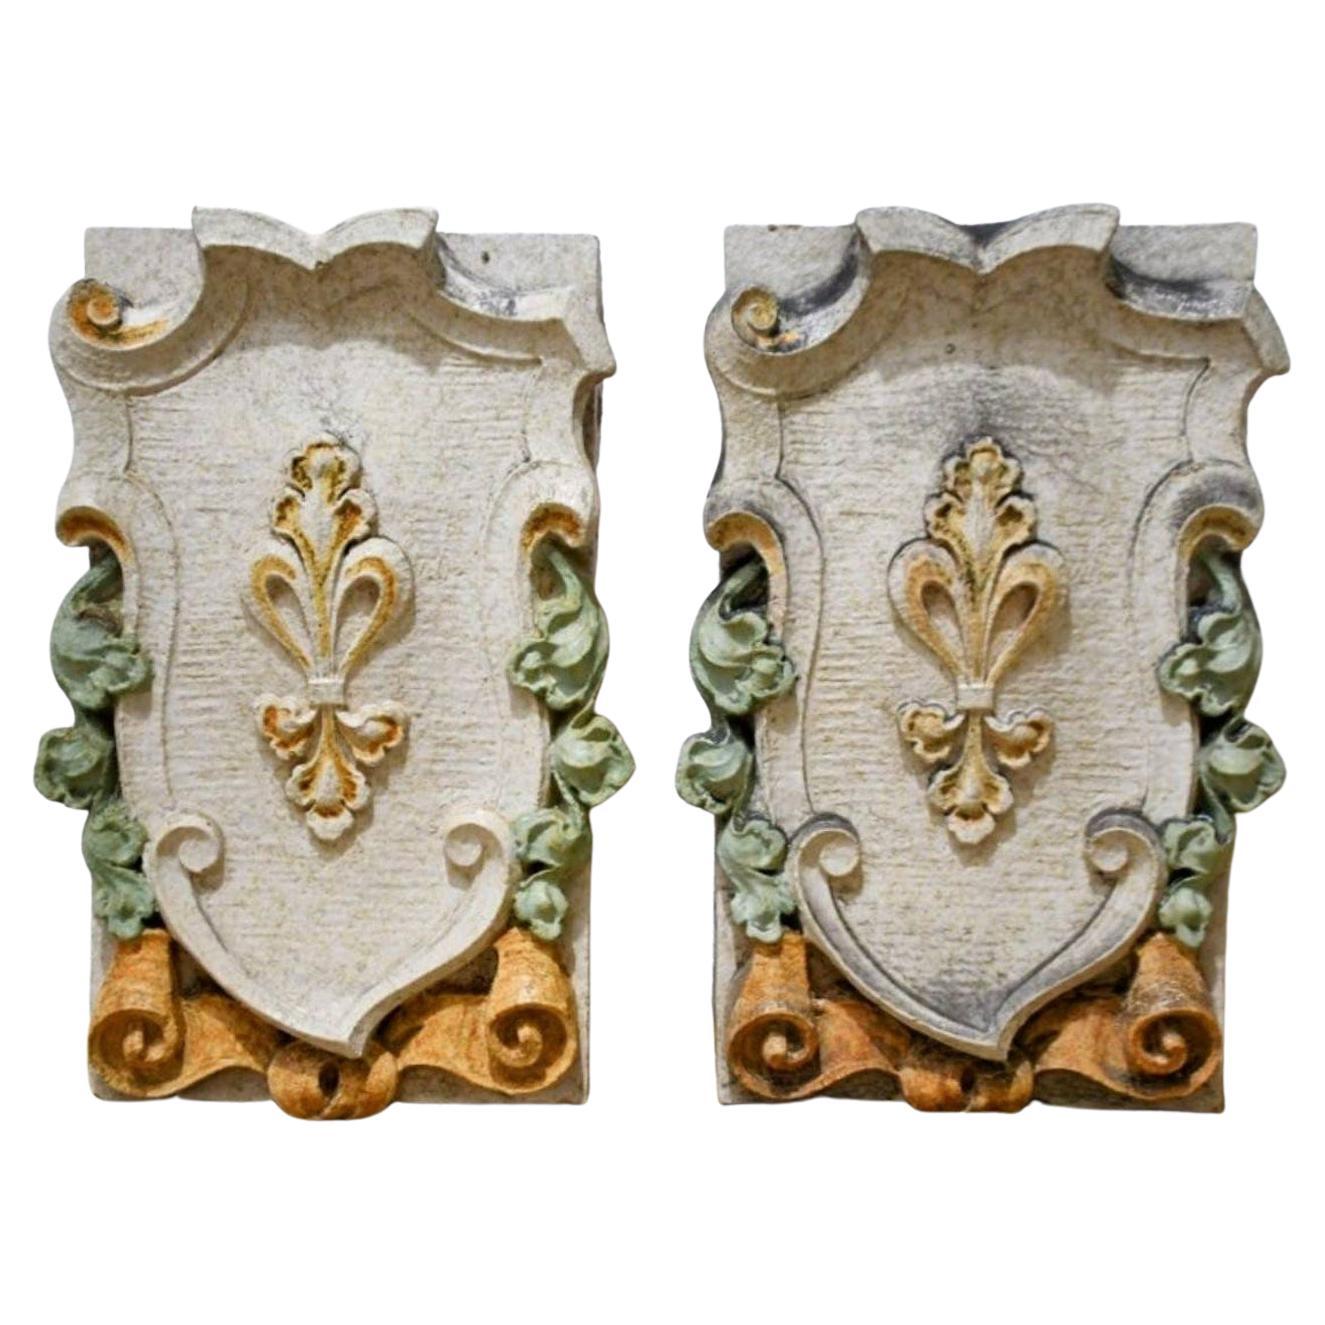 Pair of Antique American Architectural Building Elements